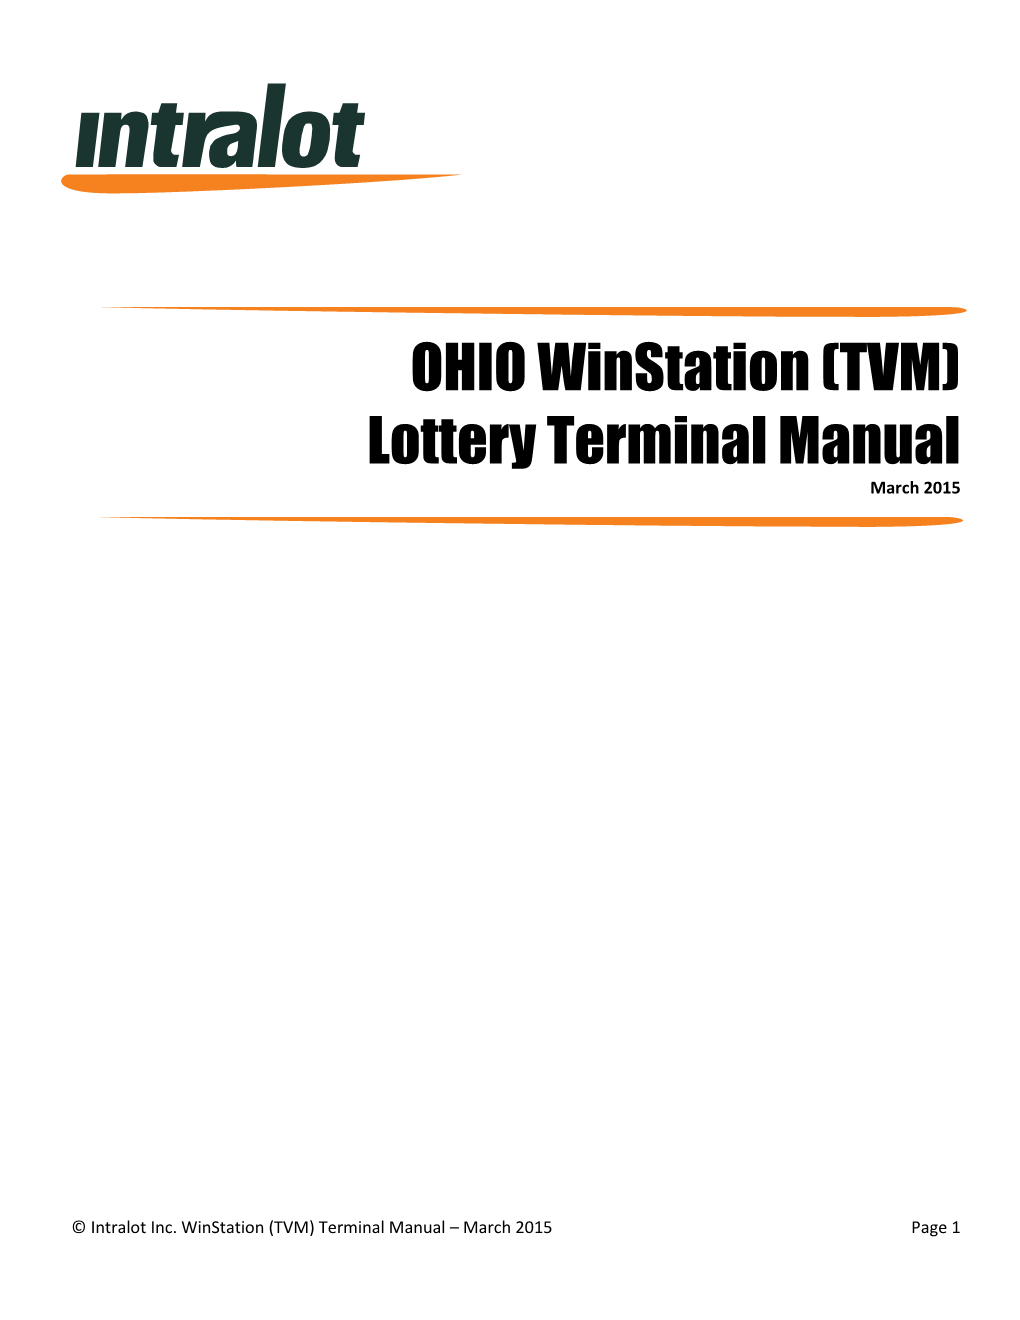 OHIO Winstation (TVM) Lottery Terminal Manual March 2015